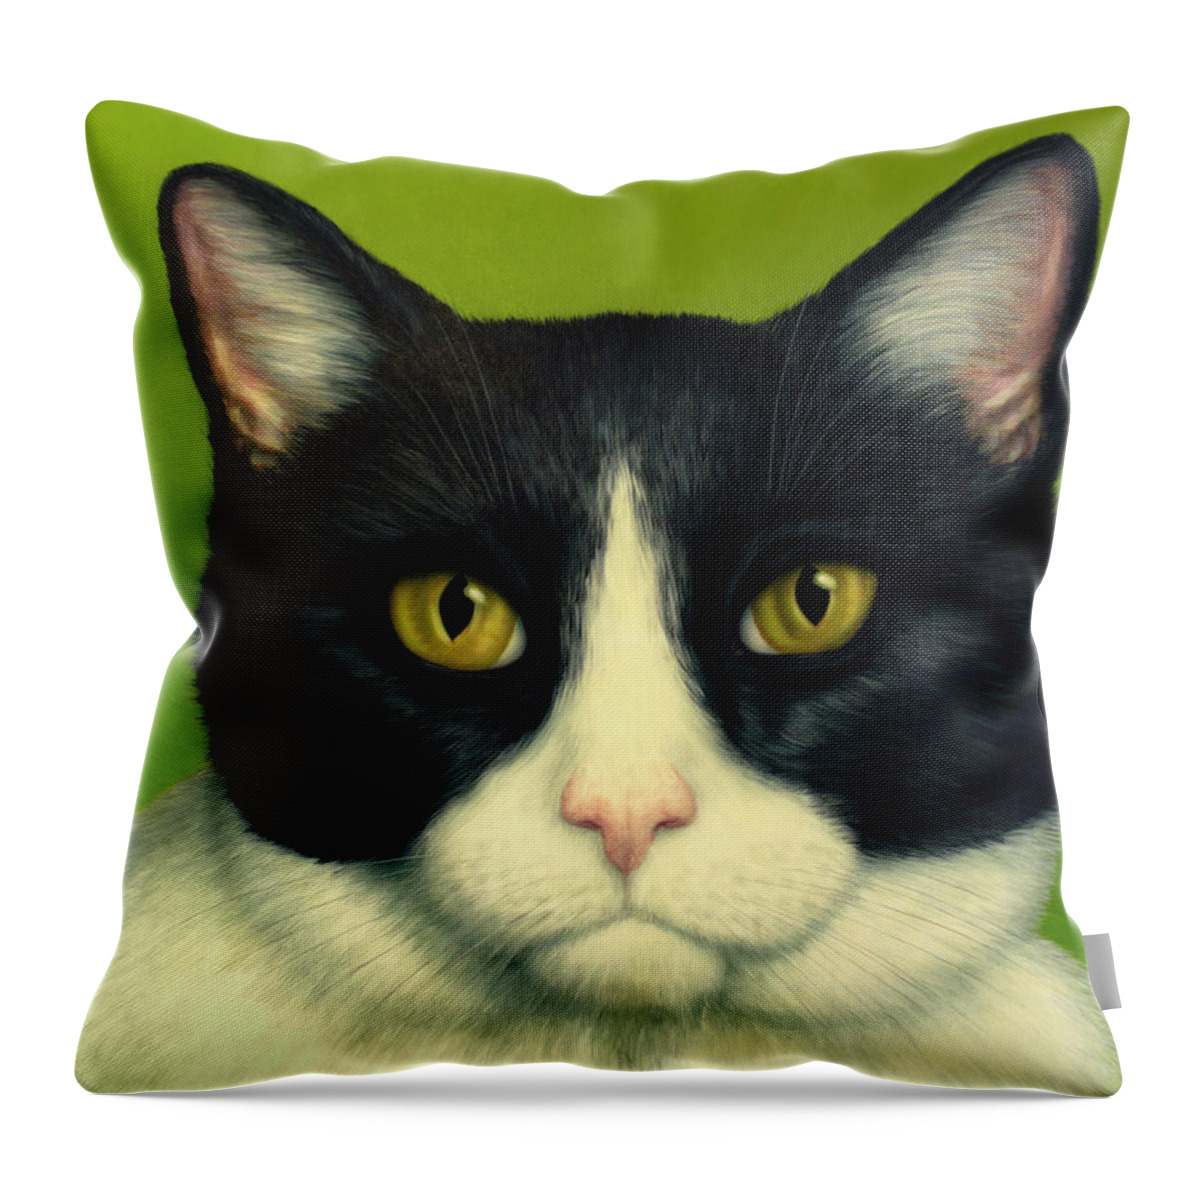 Serious Throw Pillow featuring the painting A Serious Cat by James W Johnson